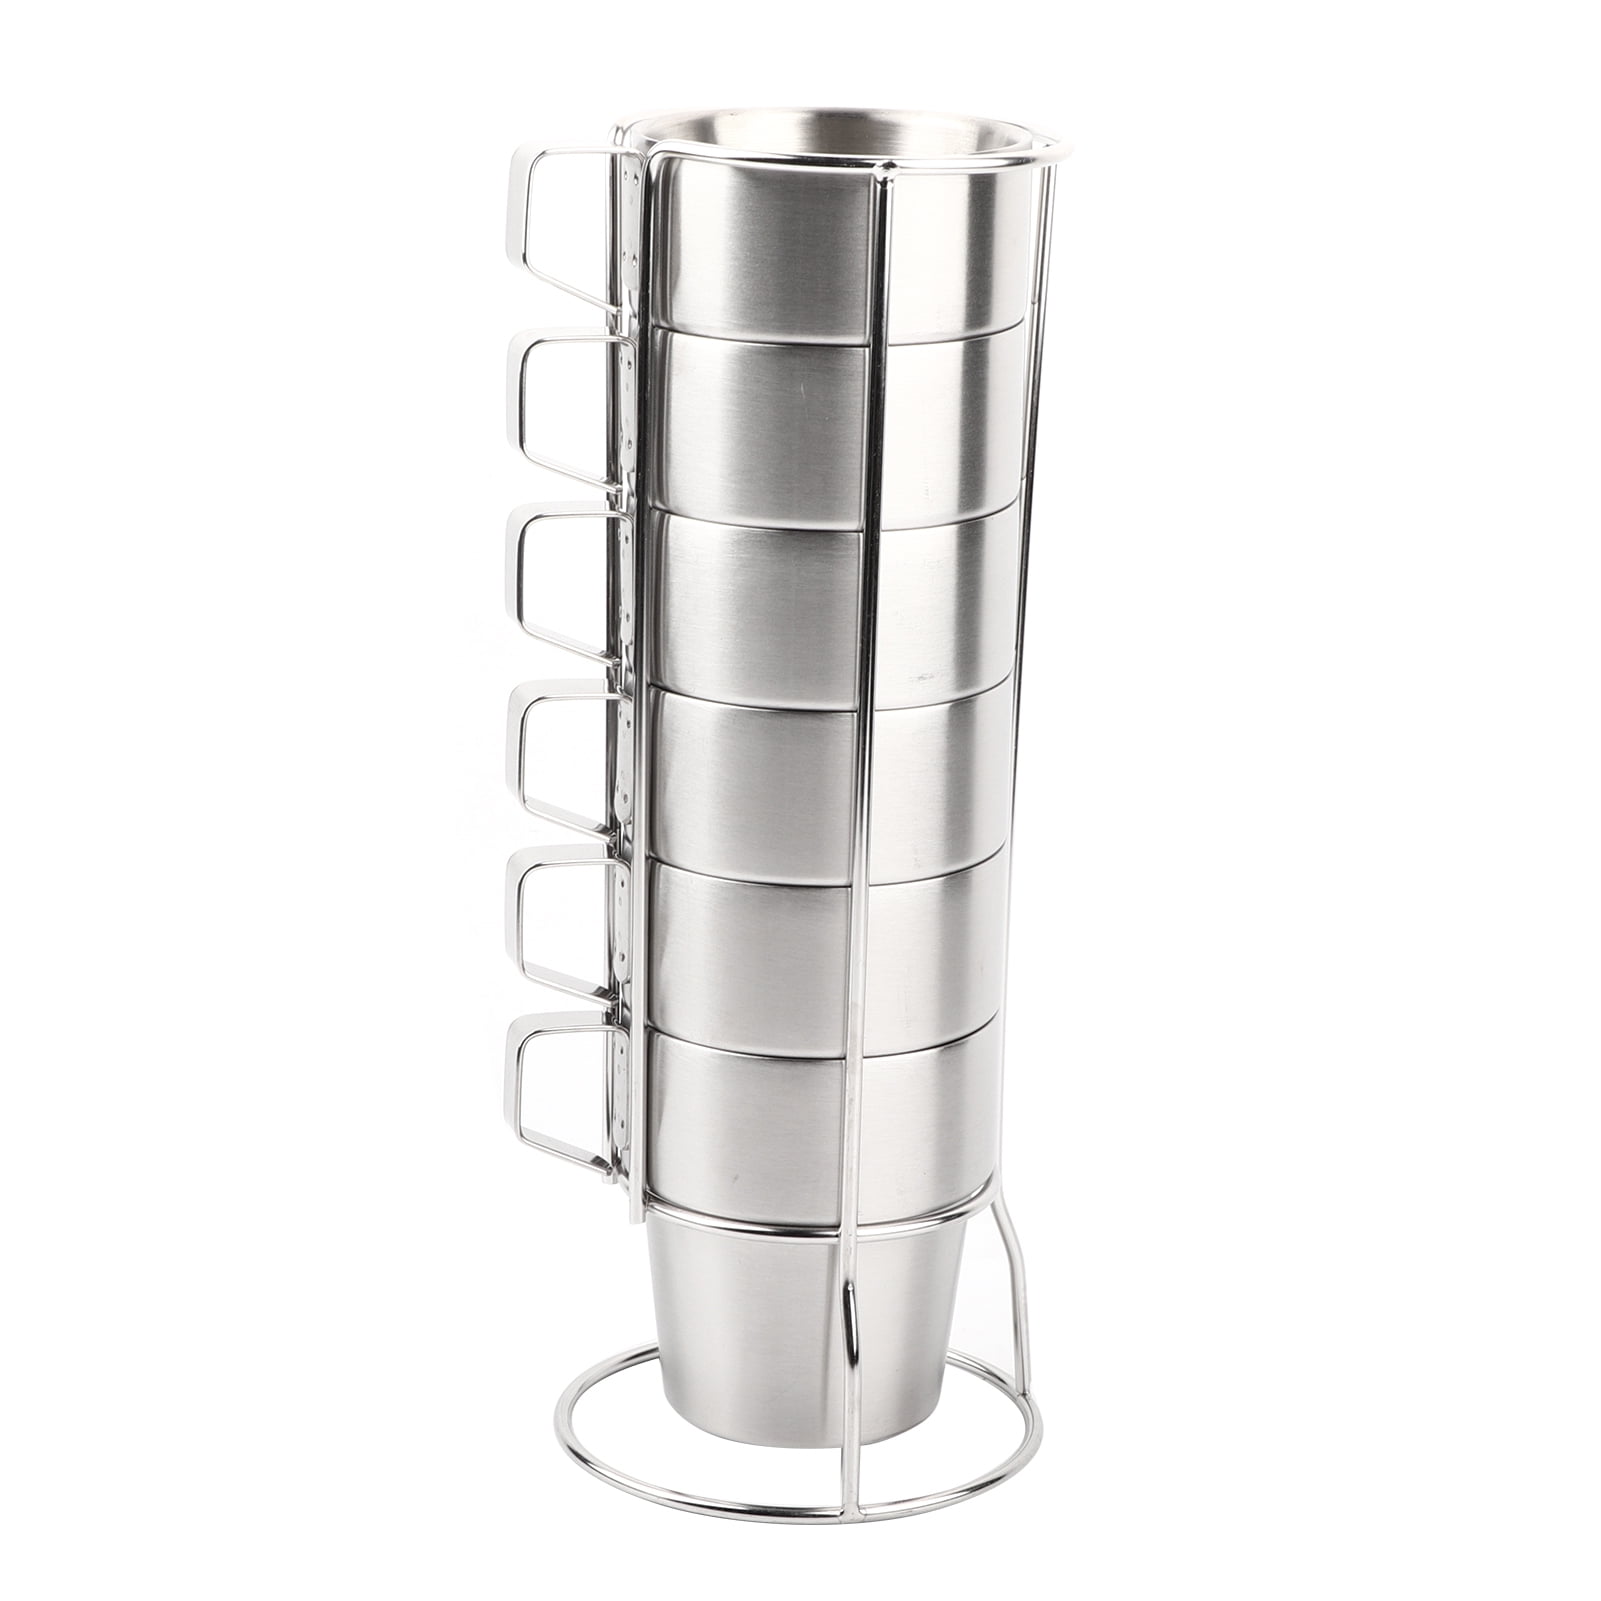 Stackable Coffee Mugs Stainless Steel Tea Water Wine Glasses Cups with Rack 